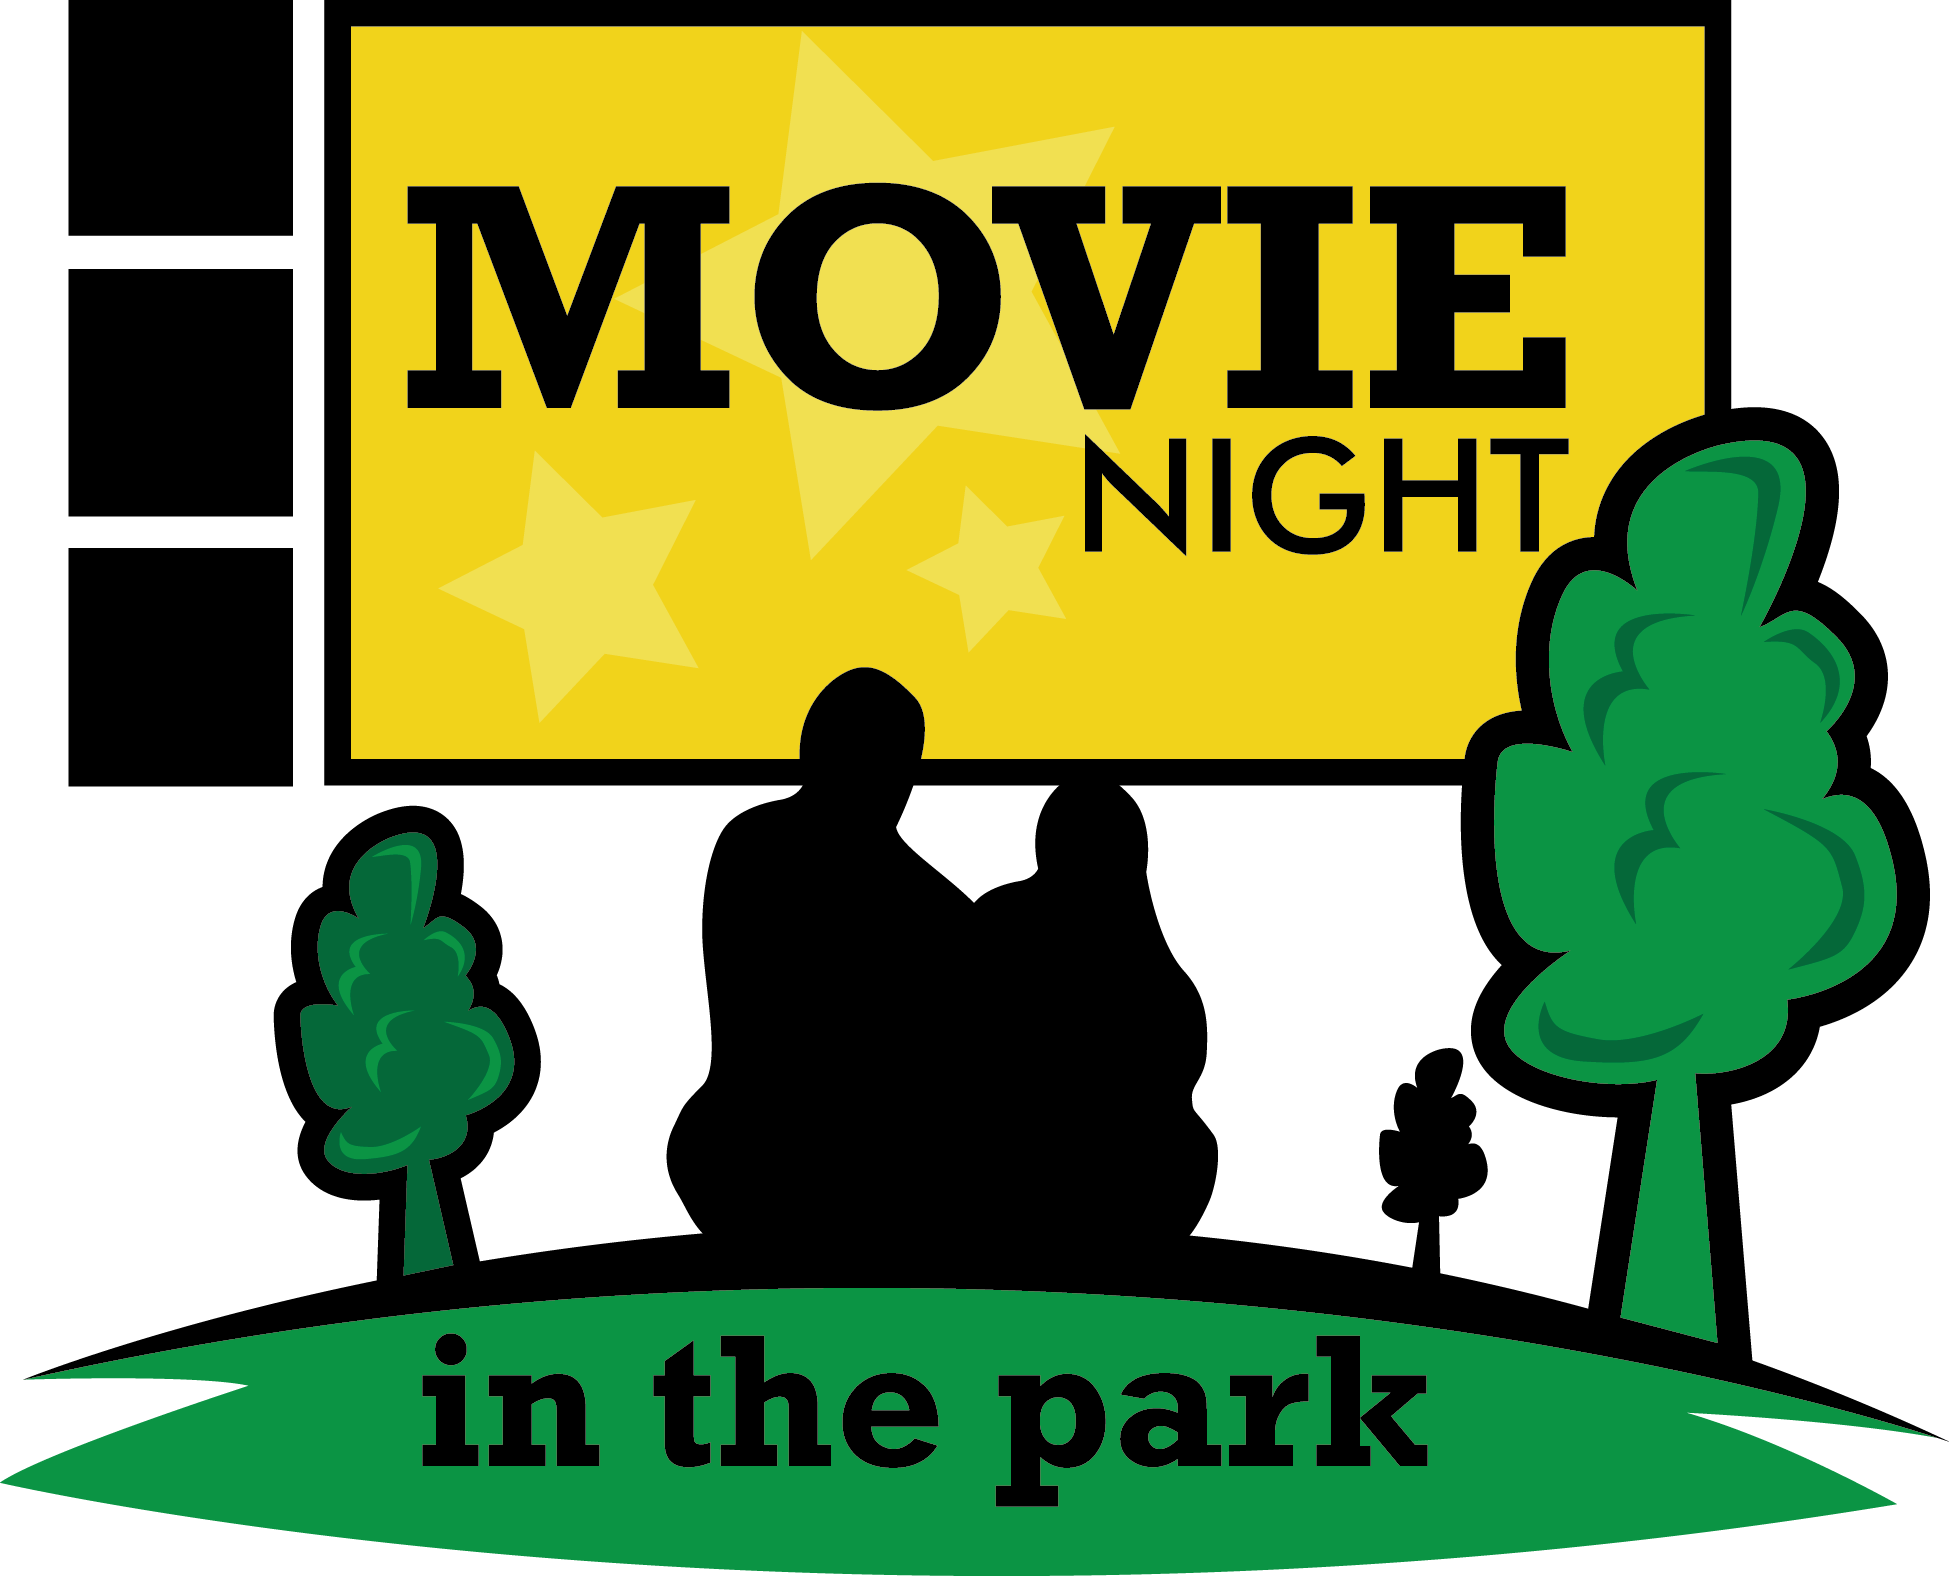 Movies in the. Park clipart community park